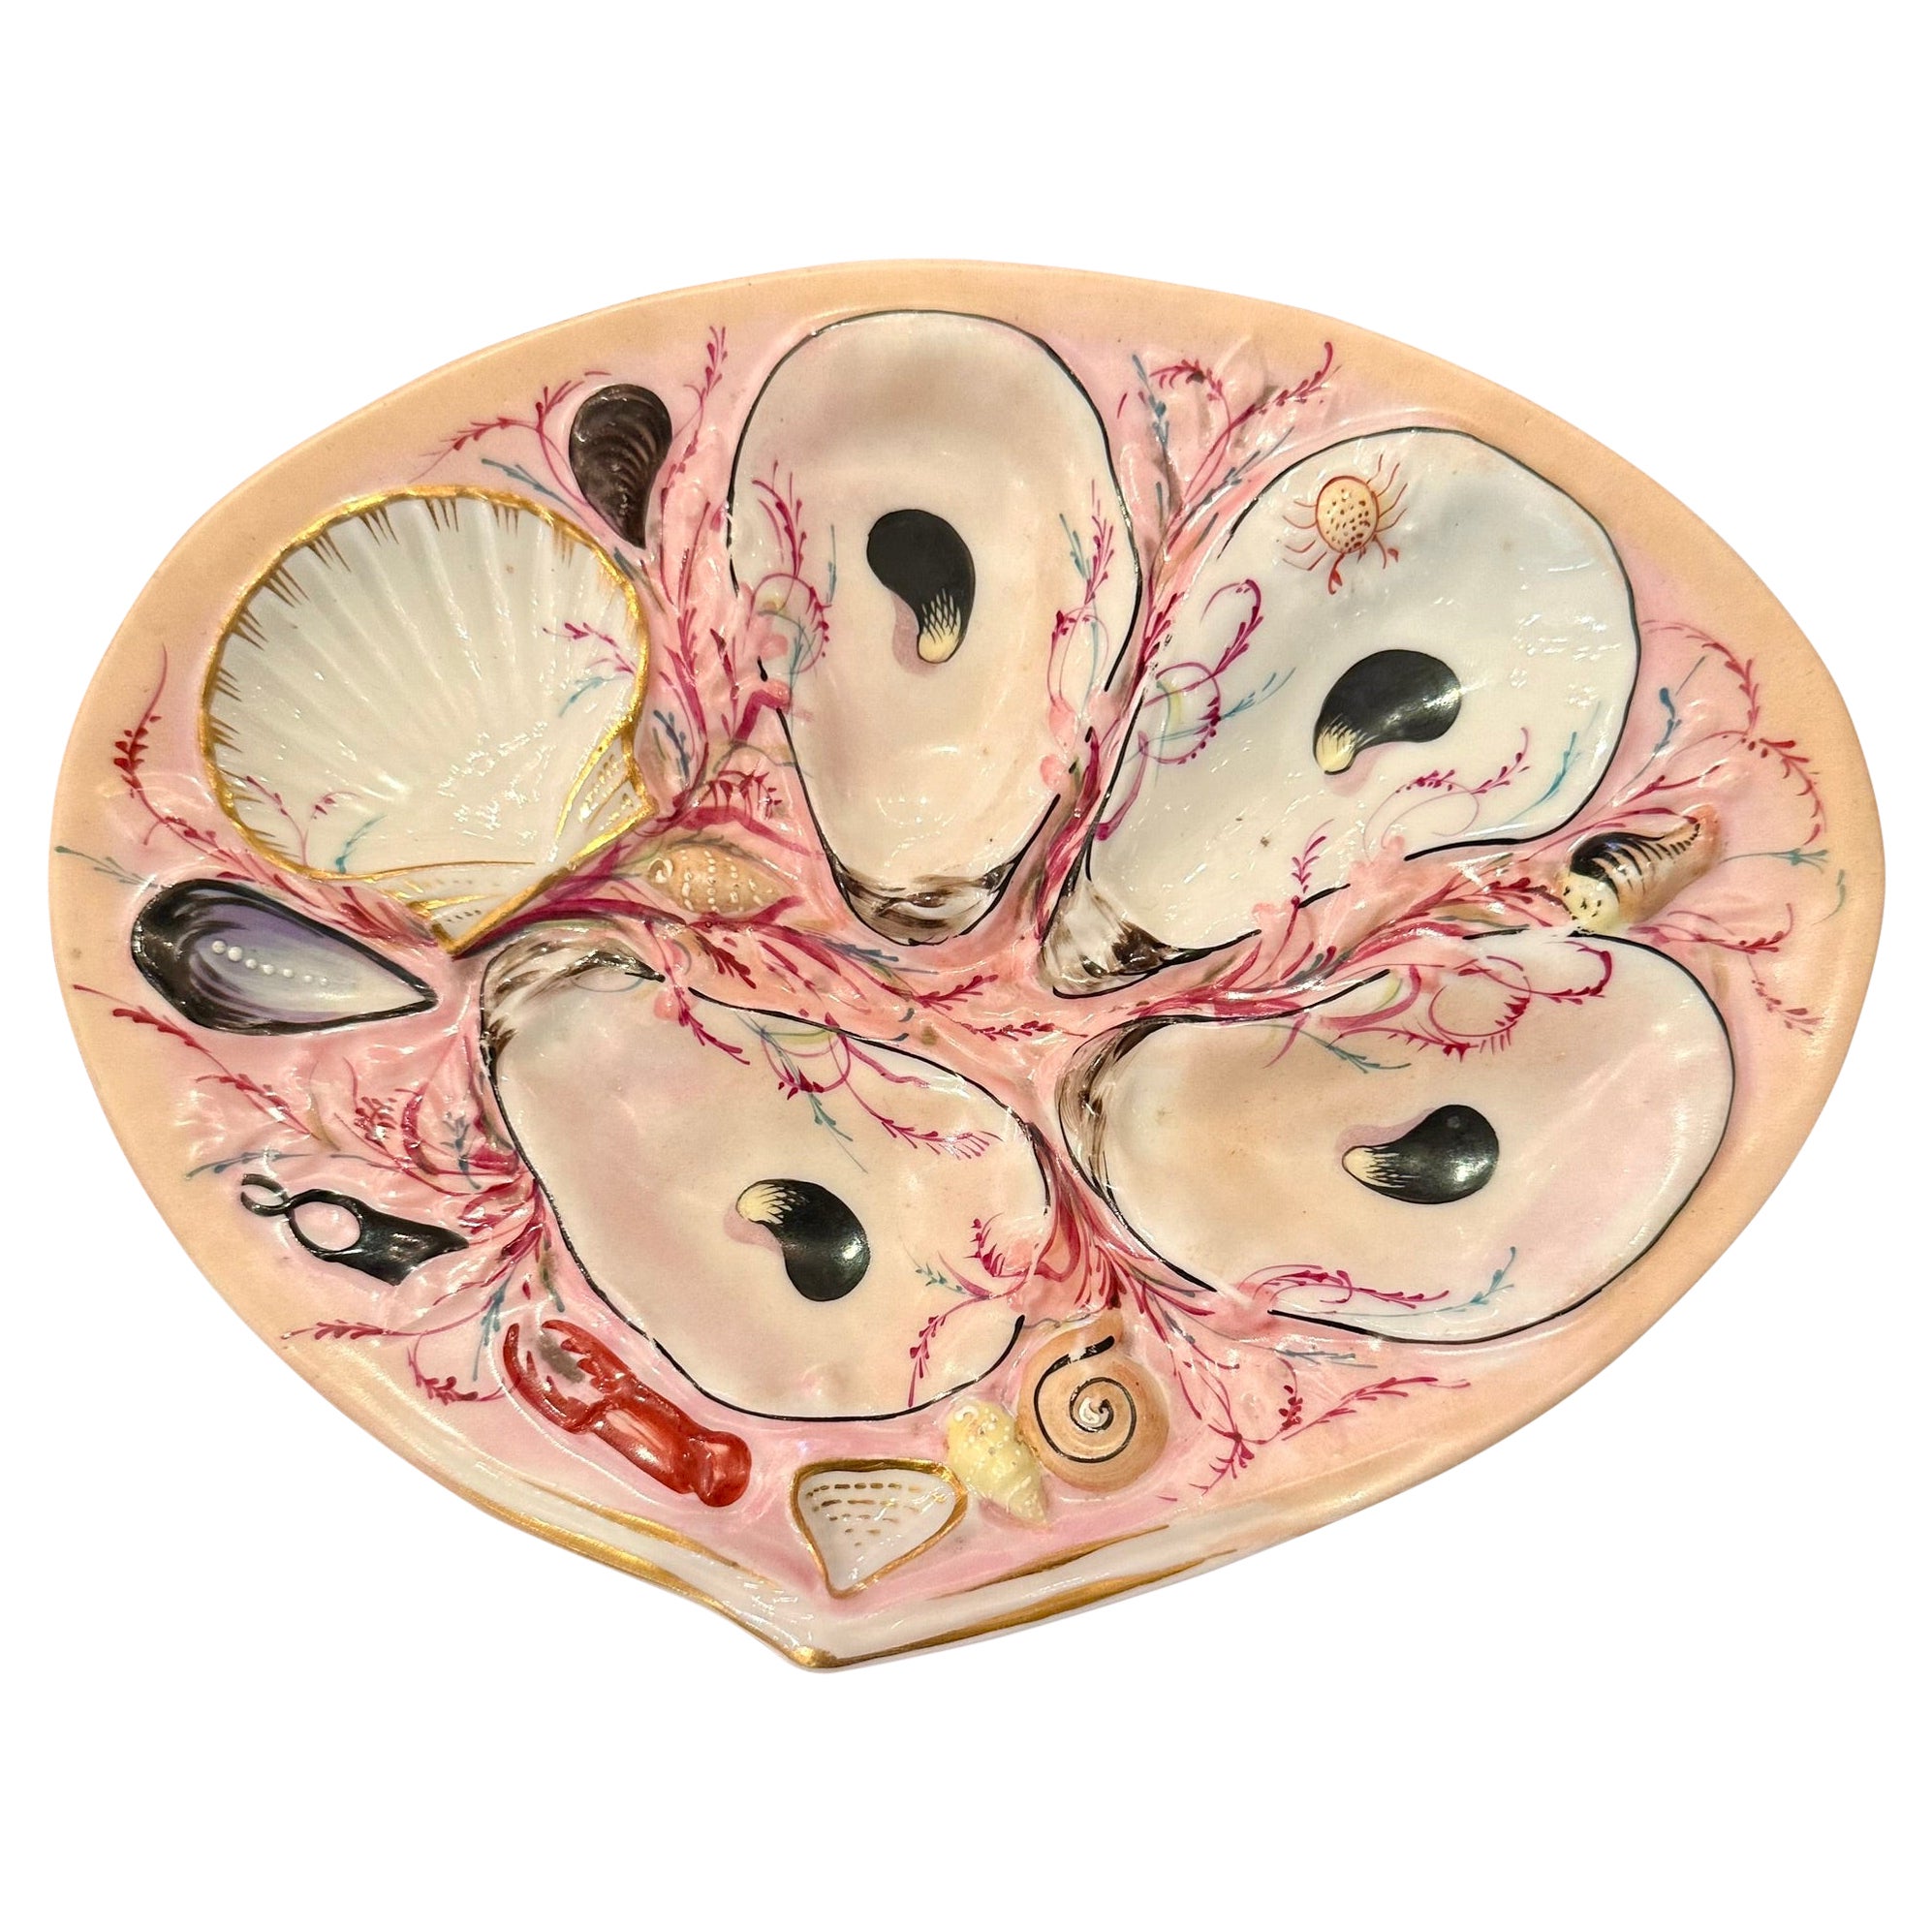 Antique American "UPW" Porcelain Pink & Peach Sea Life Oyster Plate, Circa 1880.